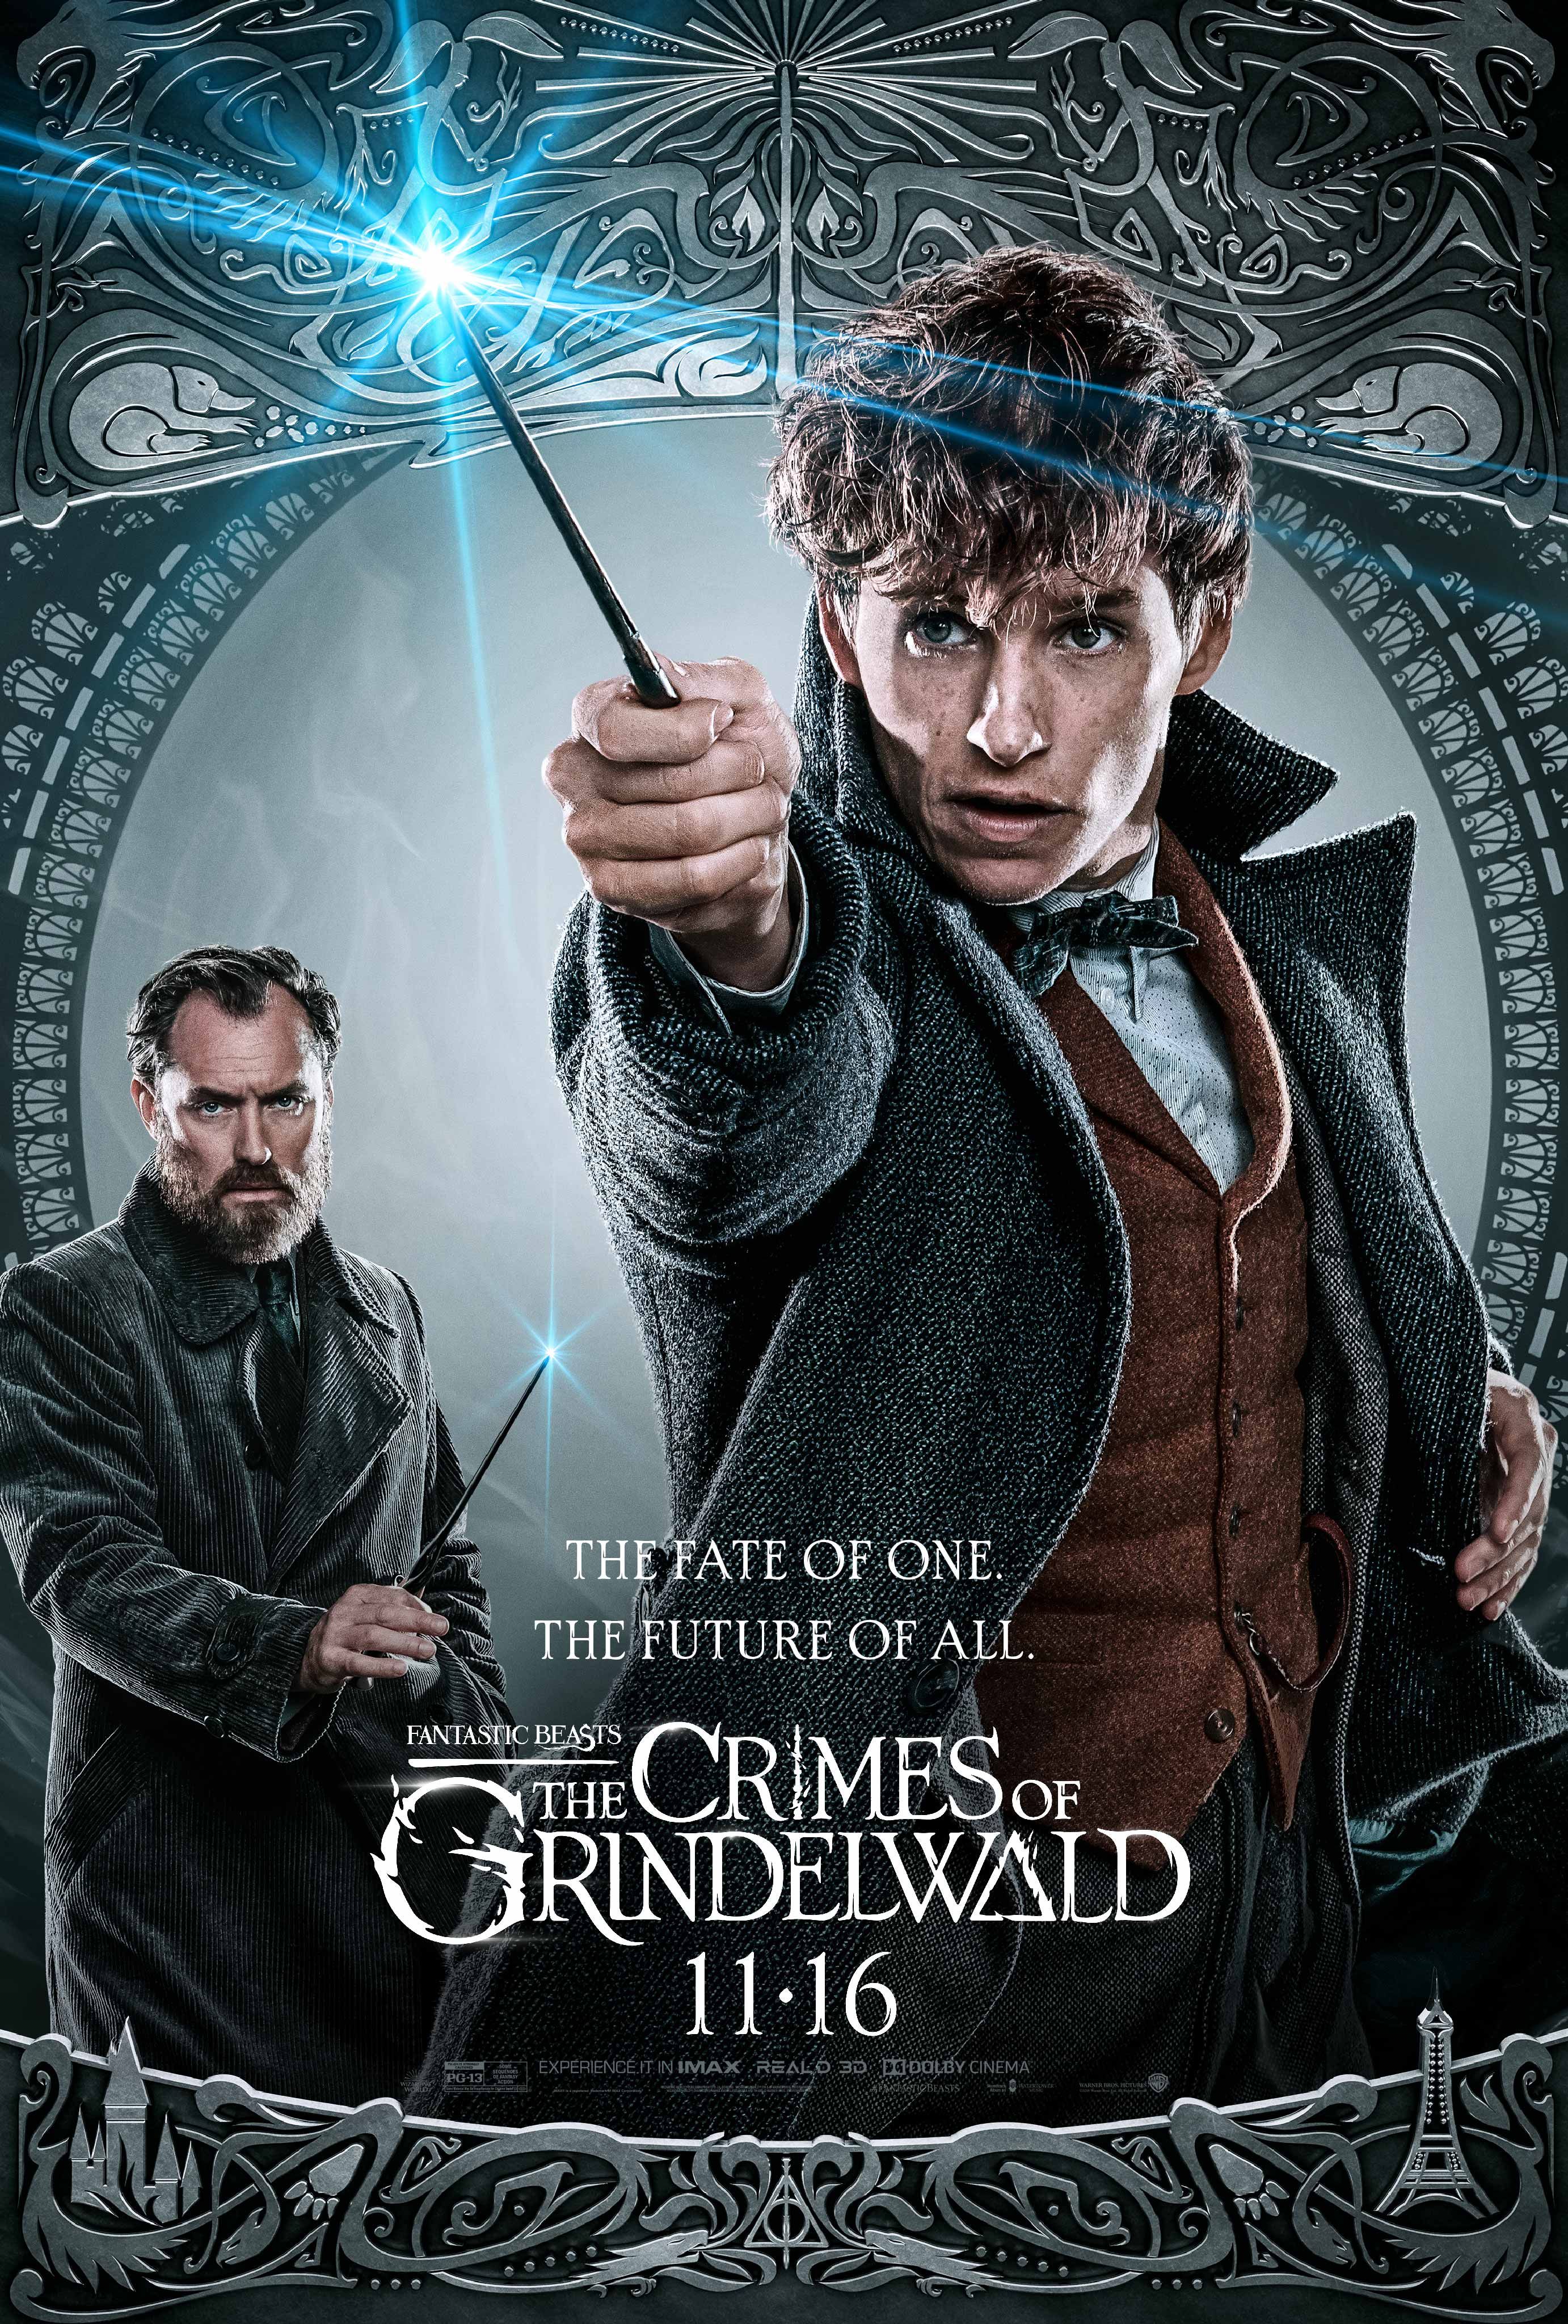 Fantastic beasts the crimes of grindelwald 24 X 14 Inch Home Decoration Poster 